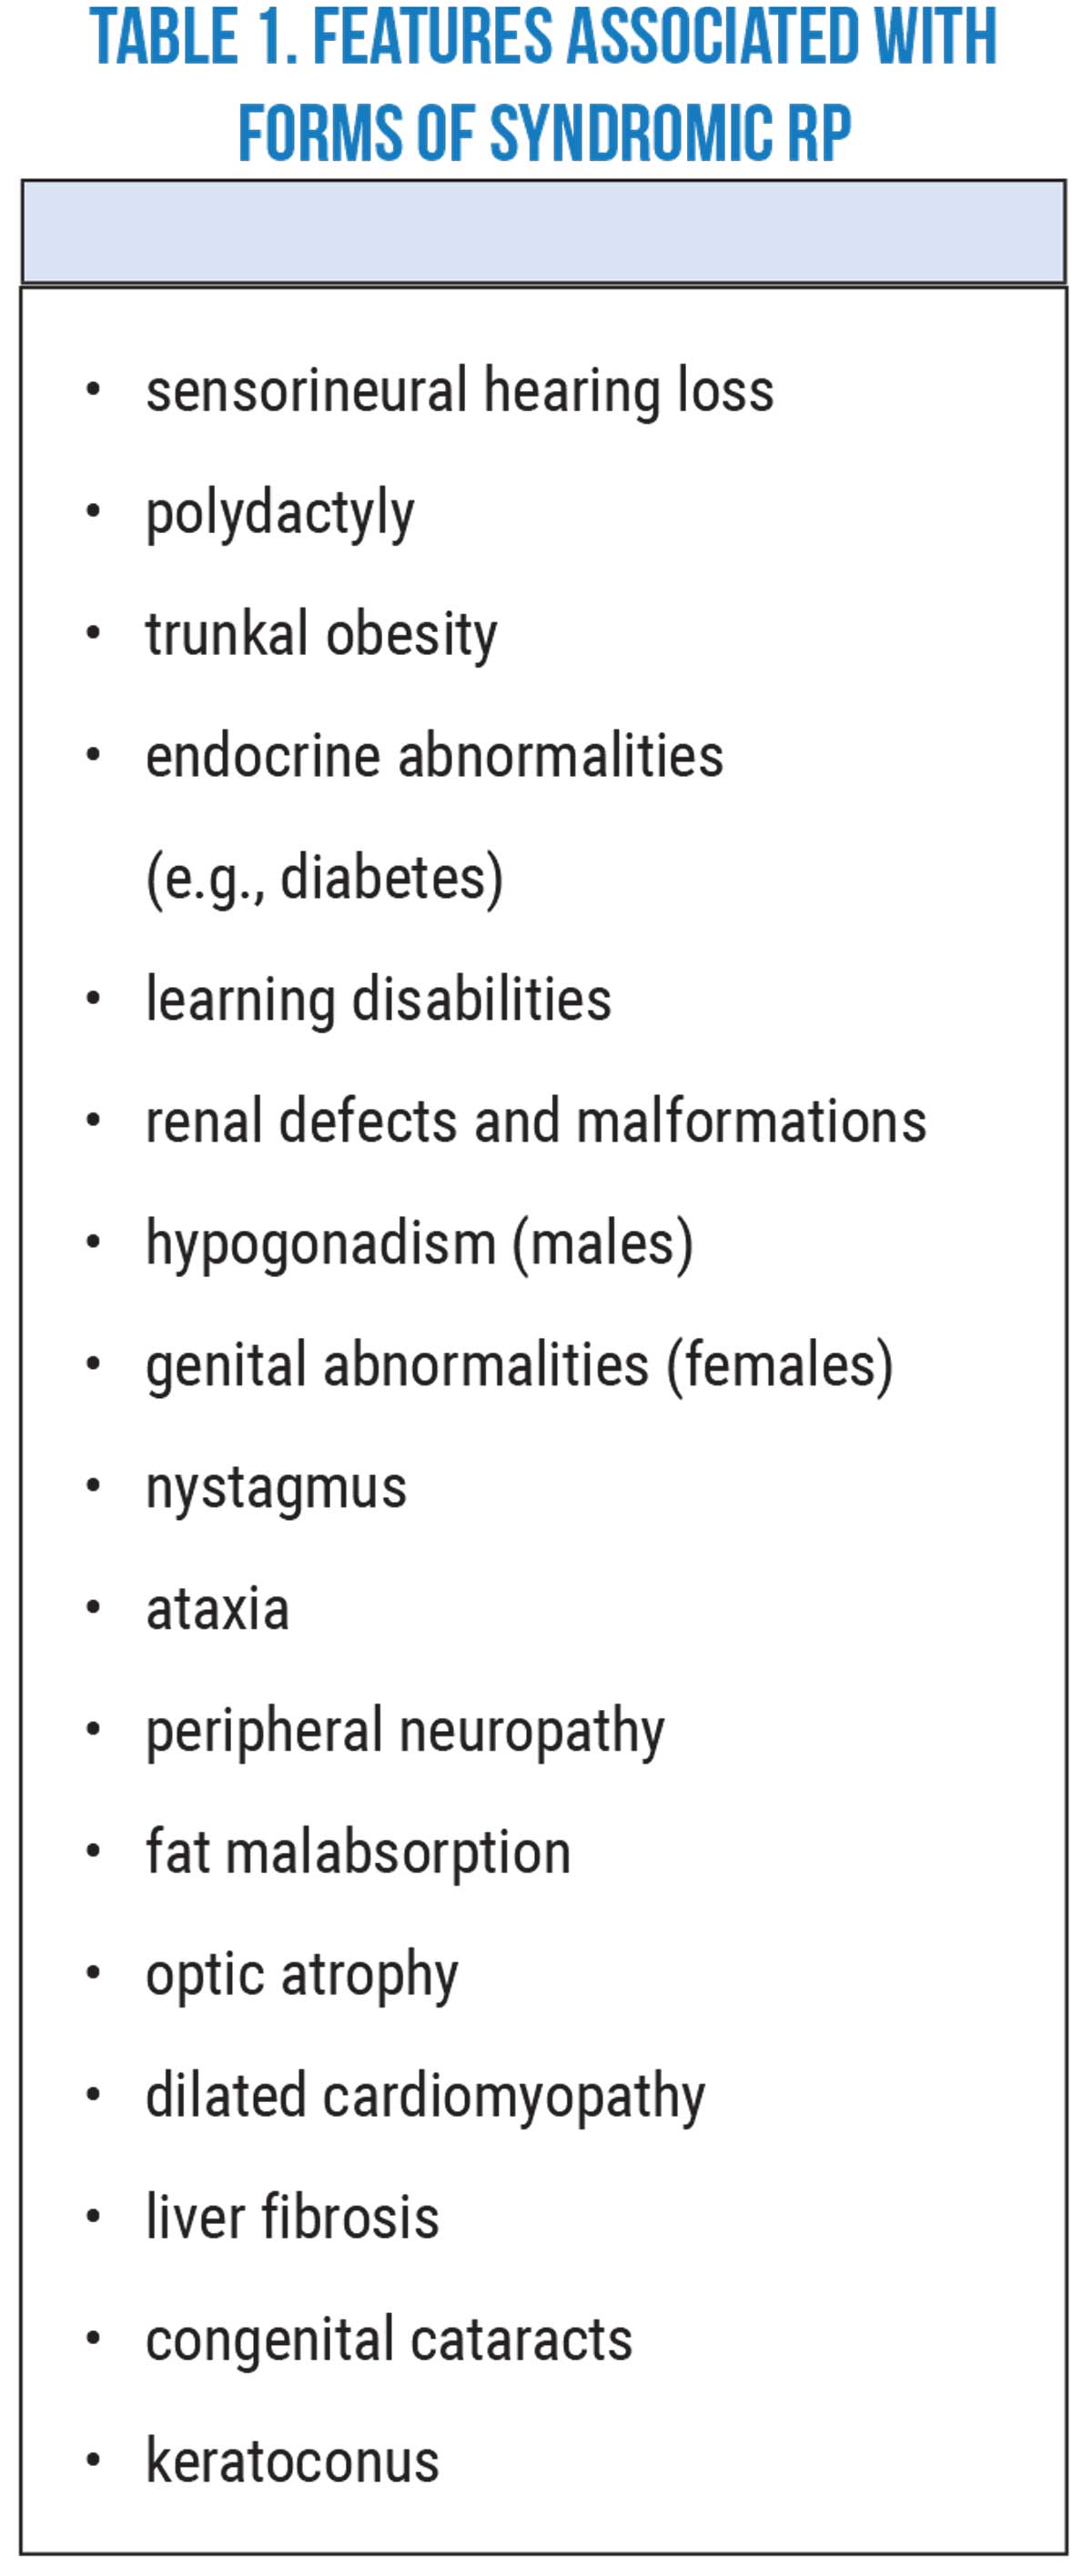 The differential diagnosis of diplopia